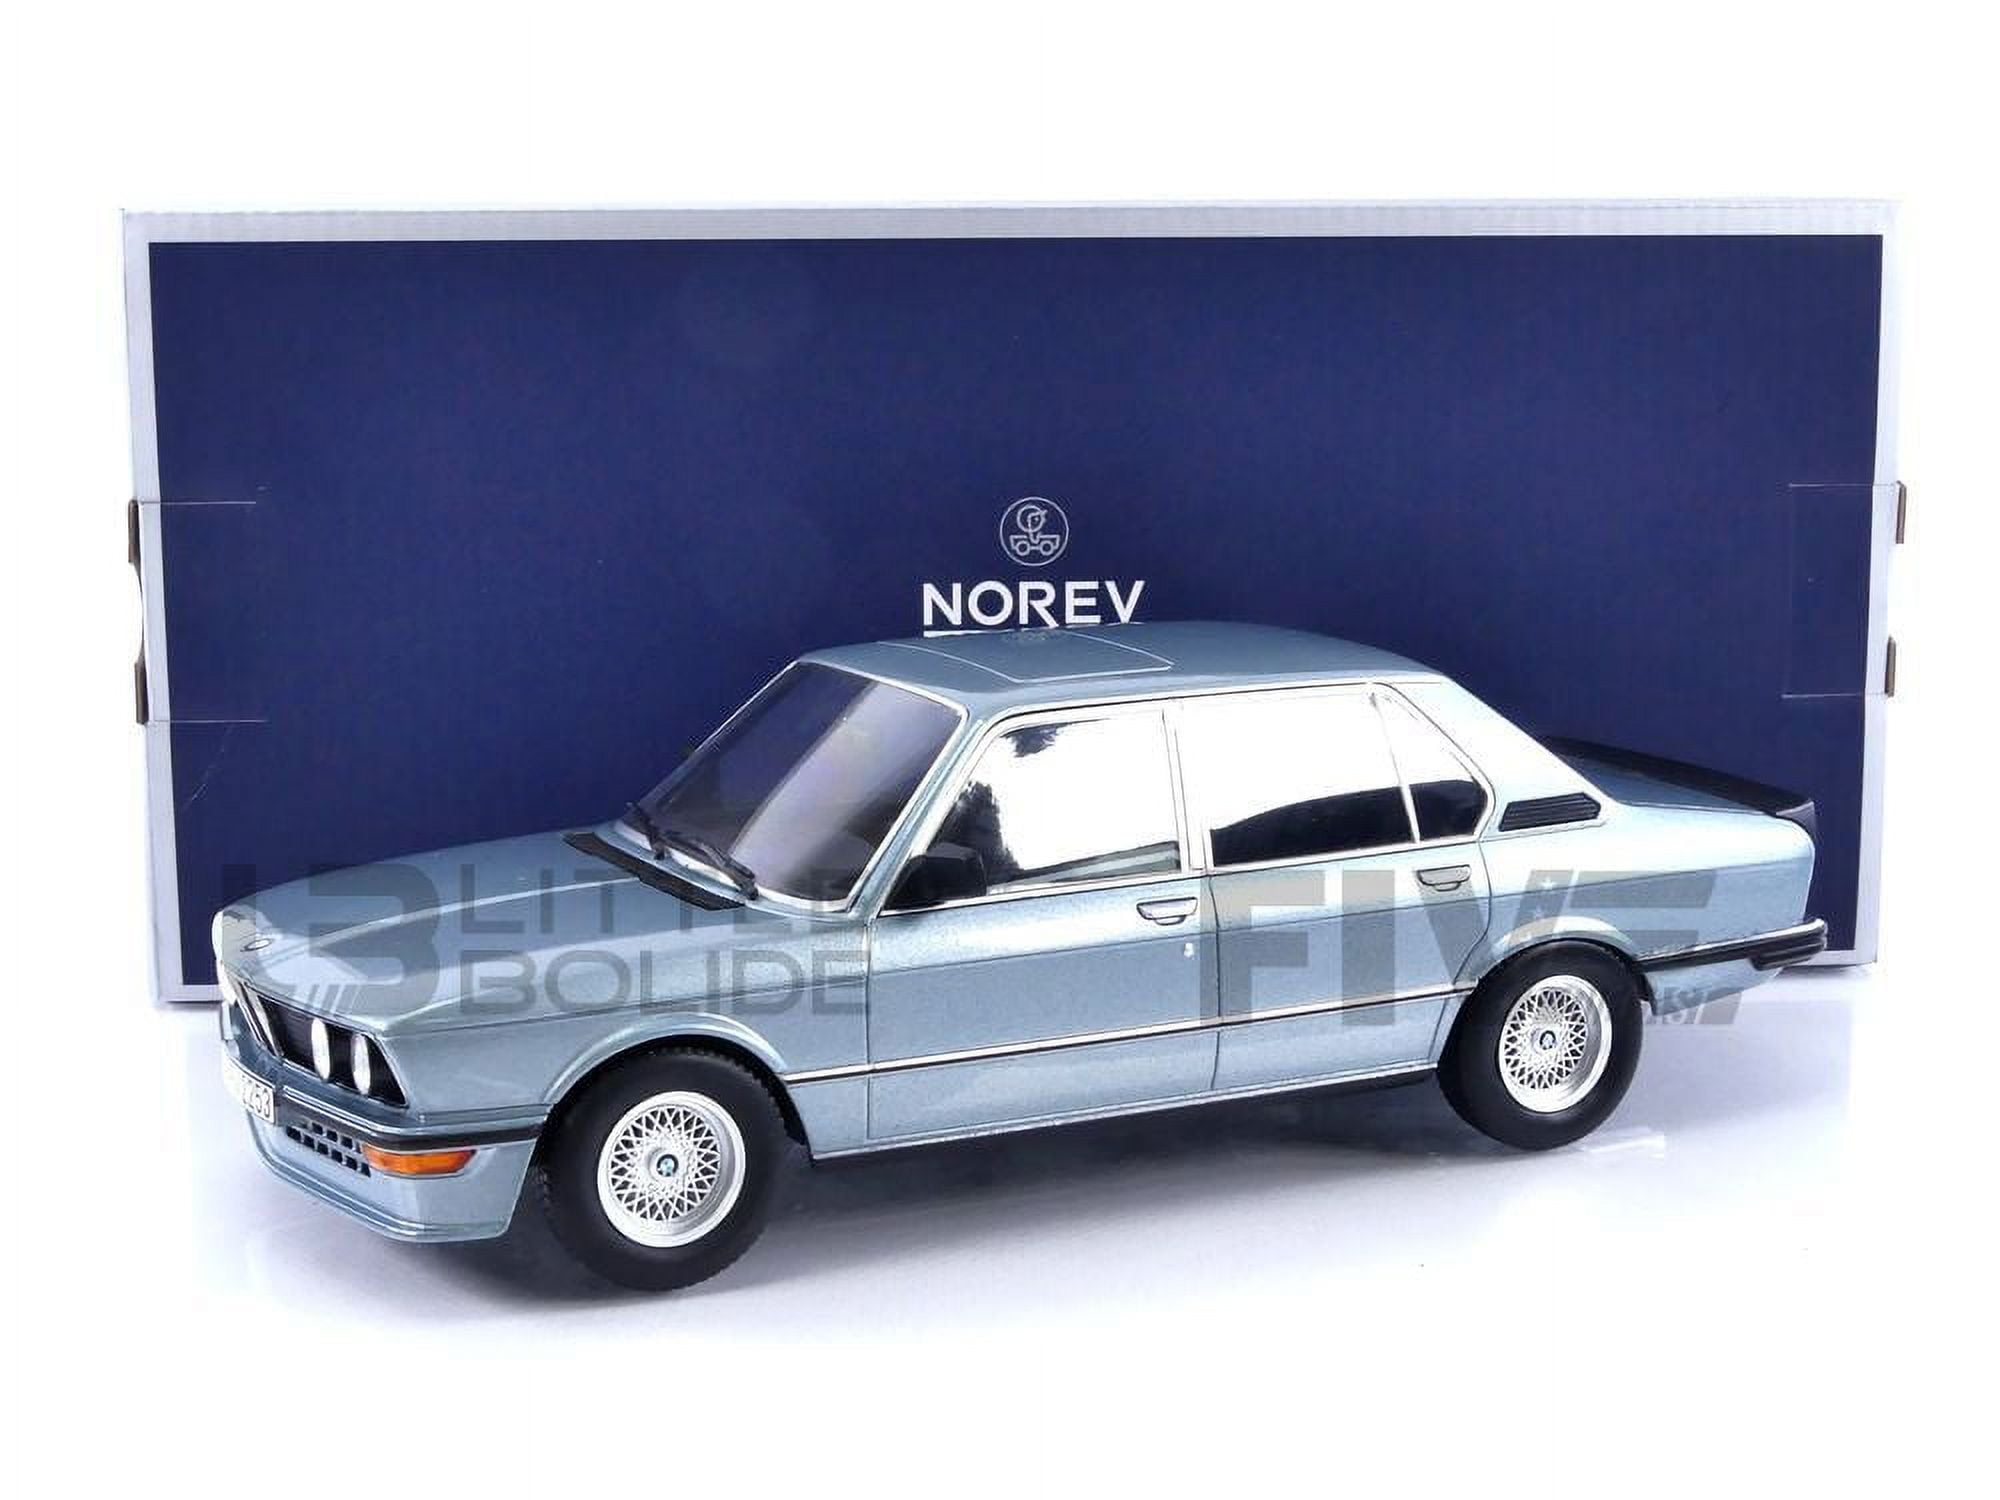 Picture of Norev 183269 1980 BMW M 535i Light Blue Metallic 1-18 Scale Diecast Model Car